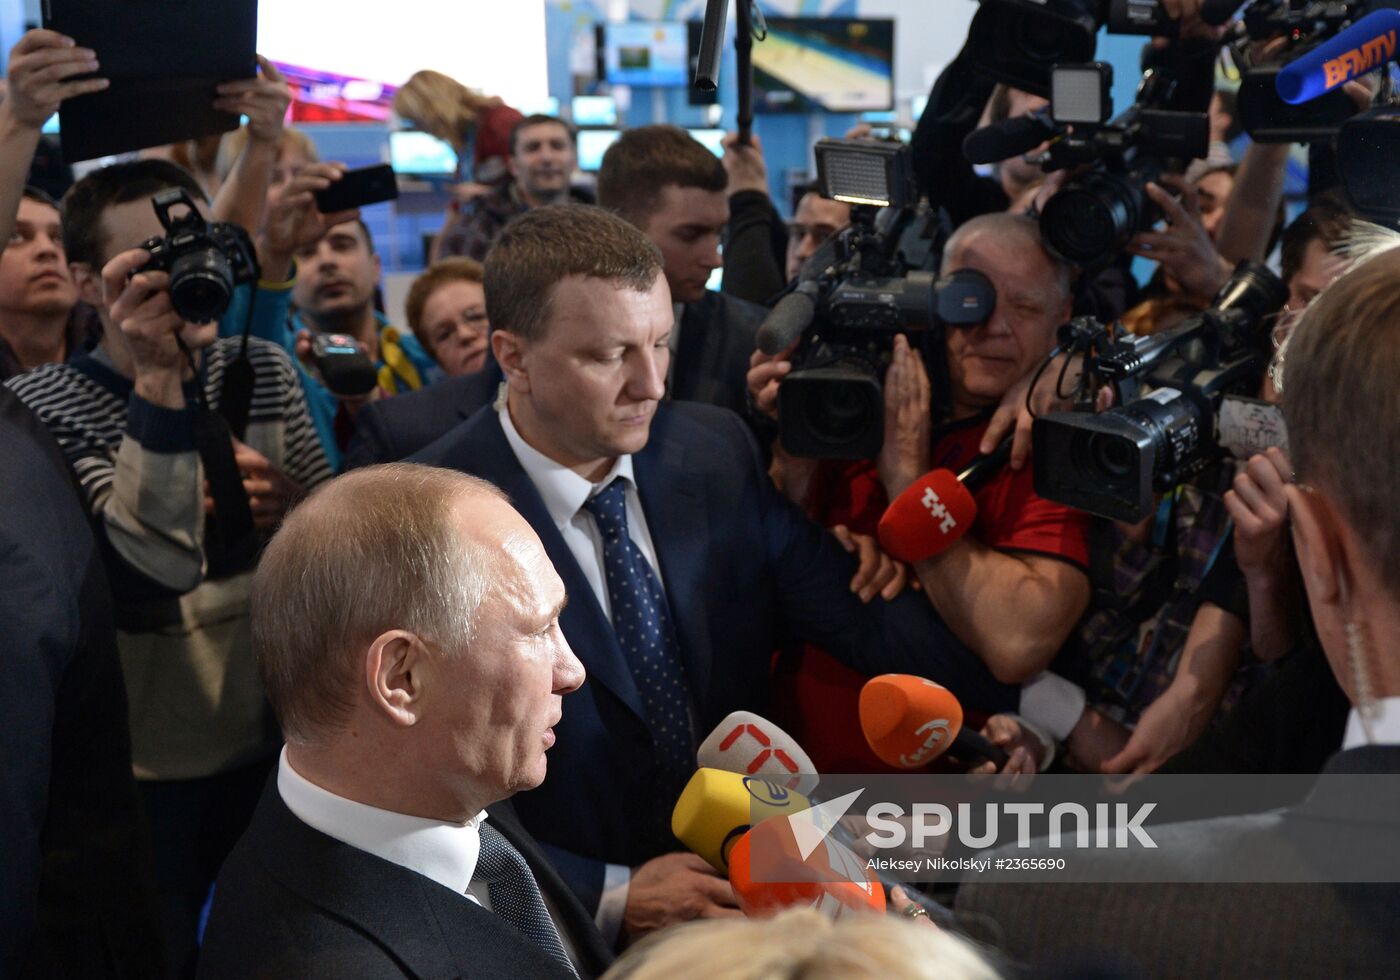 Putin meets members of Public Council on 2014 Olympics